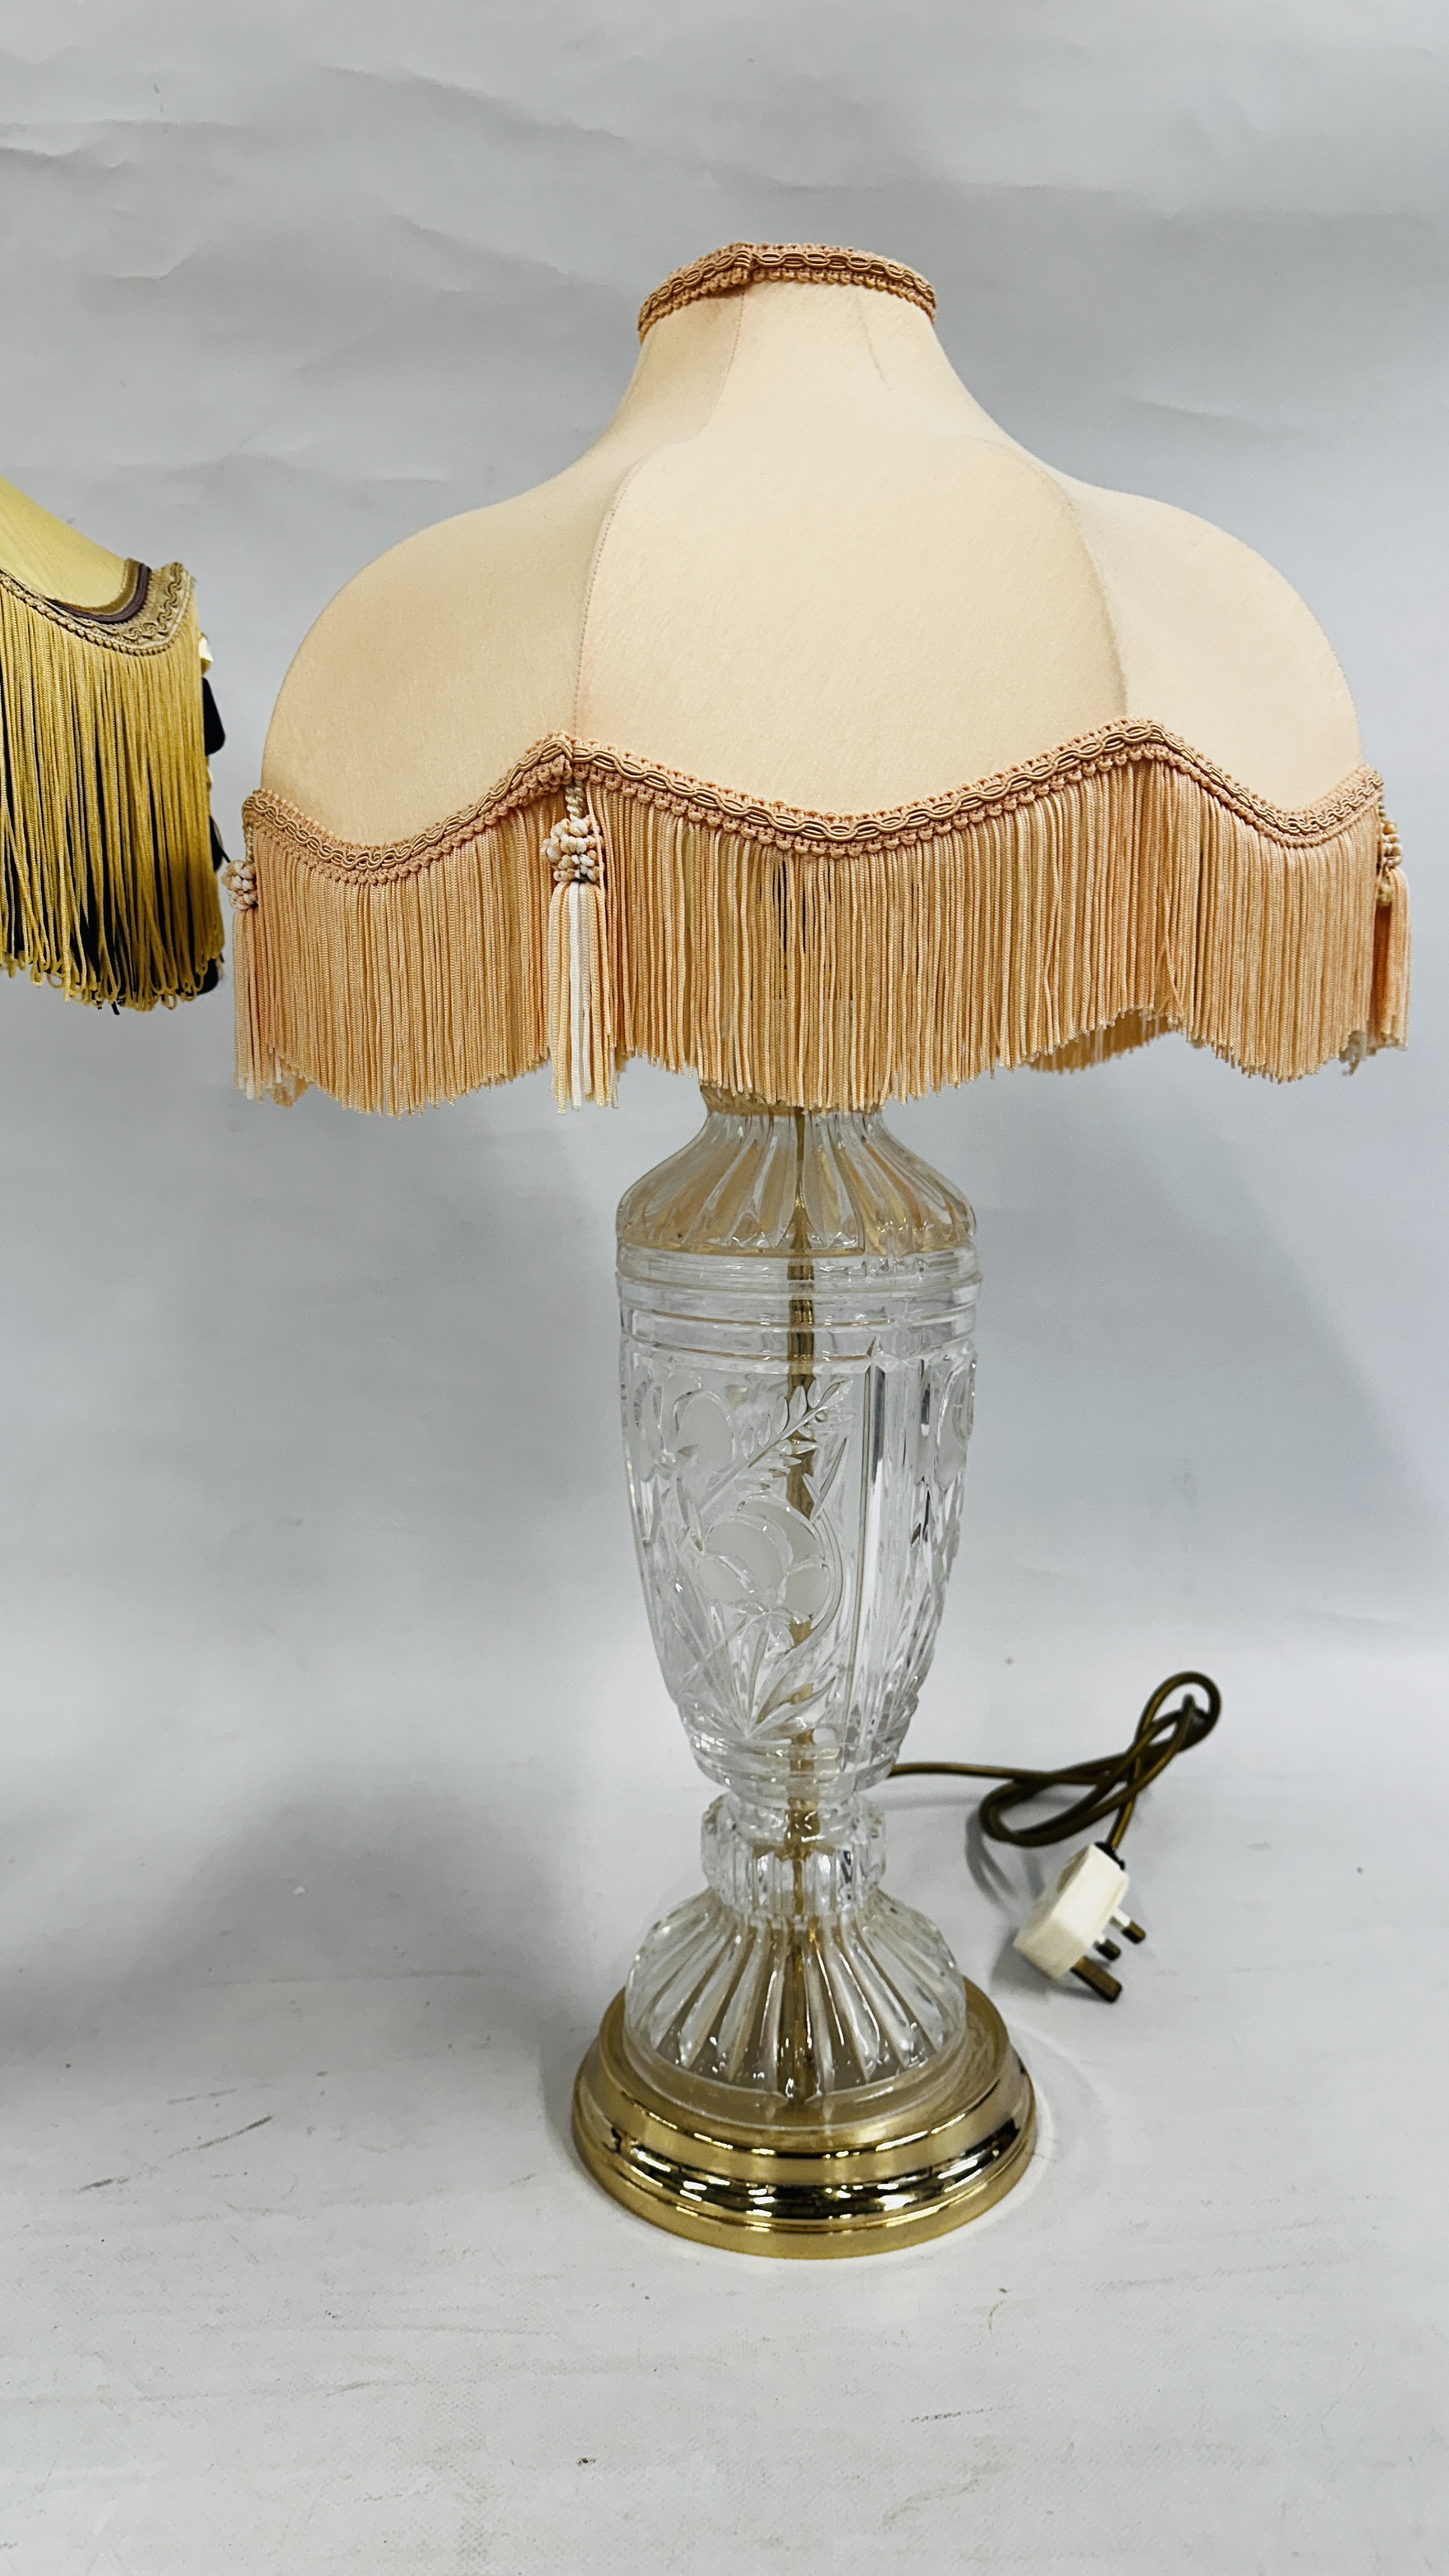 TWO LARGE DECORATIVE GLASS TABLE LAMPS. - Image 2 of 5